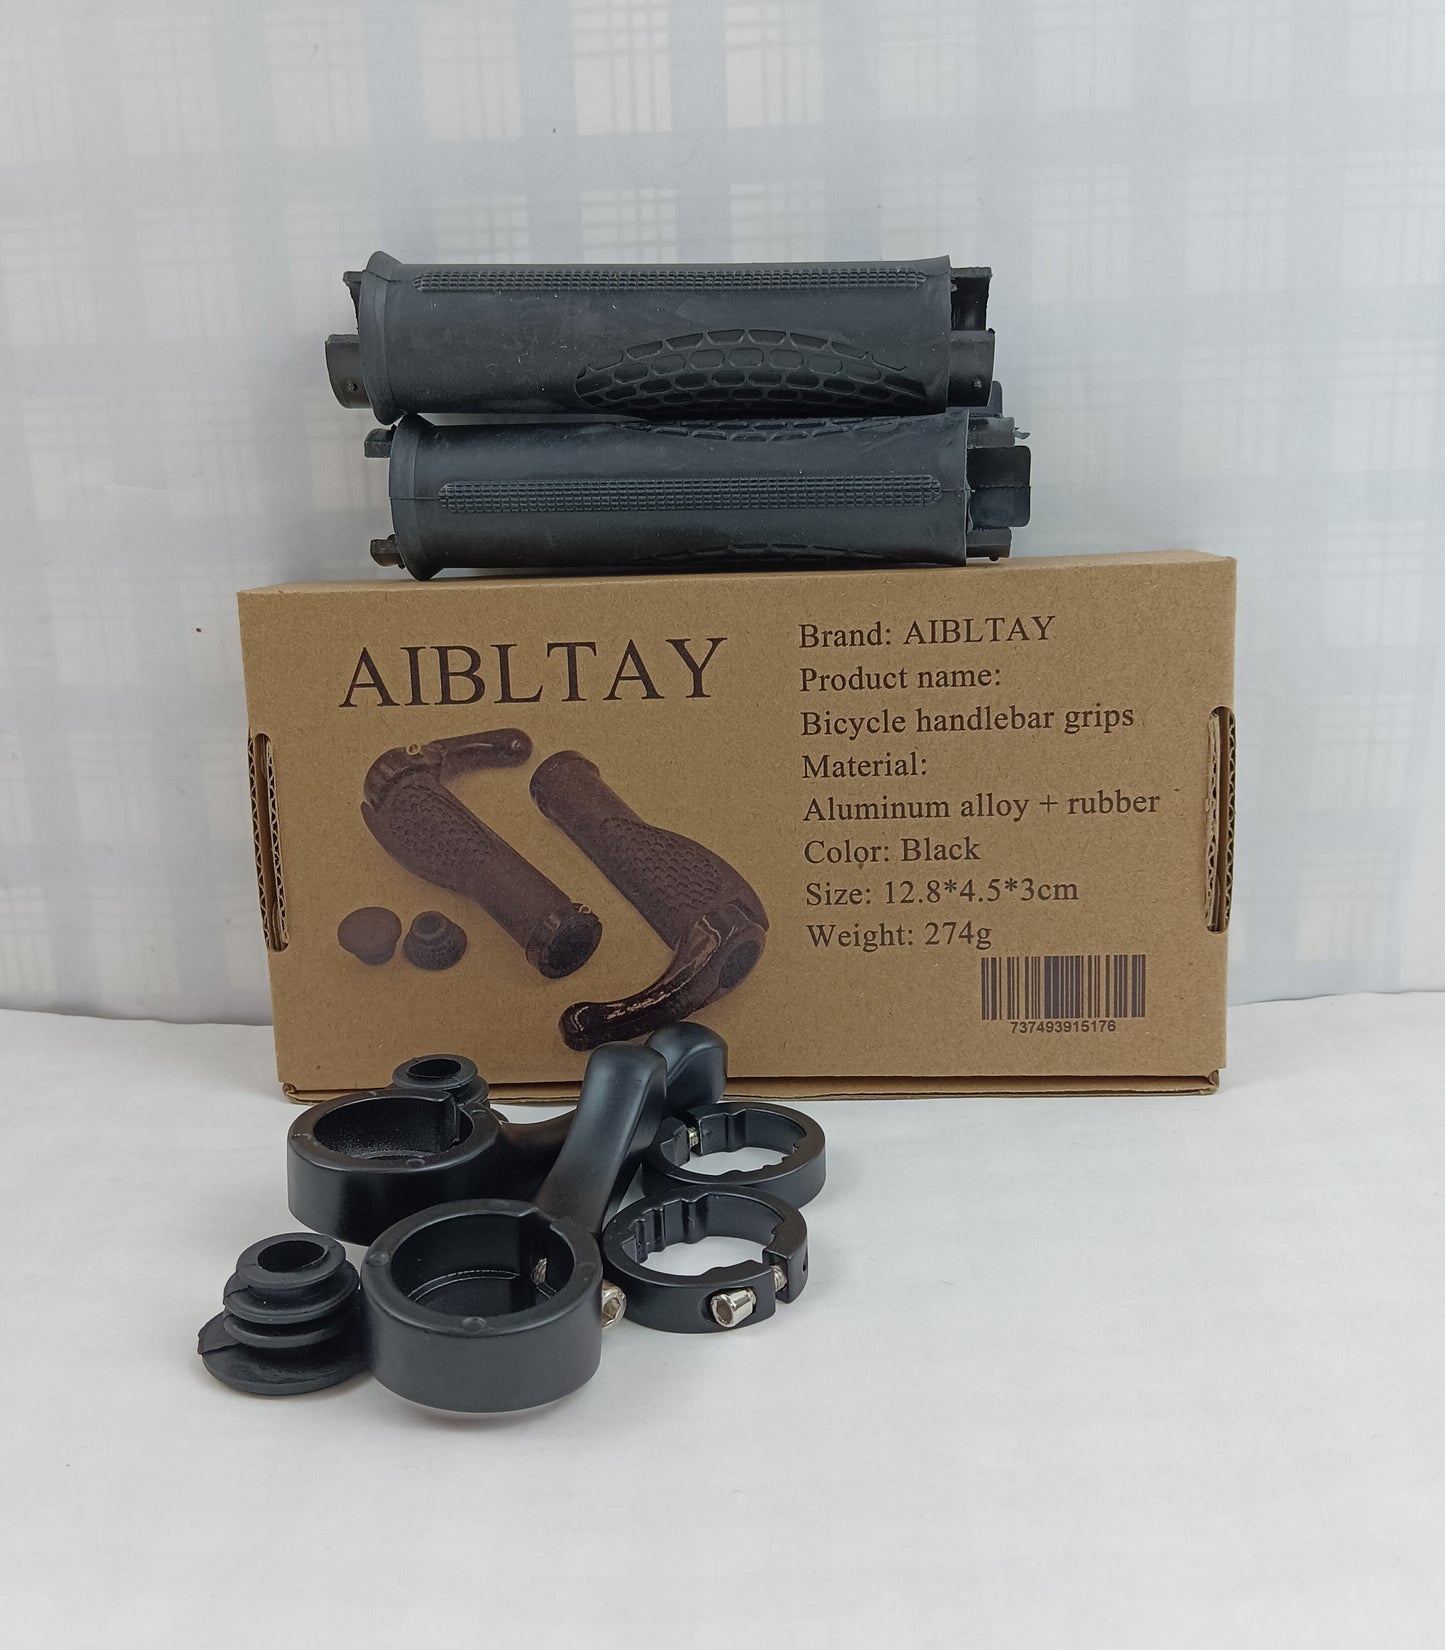 AIBLTAY bicycle handlebar grips bicycle handlebar covers universal mountain bike handlebar gloves kids cycling handlebar covers rubber grip handle grip covers accessories